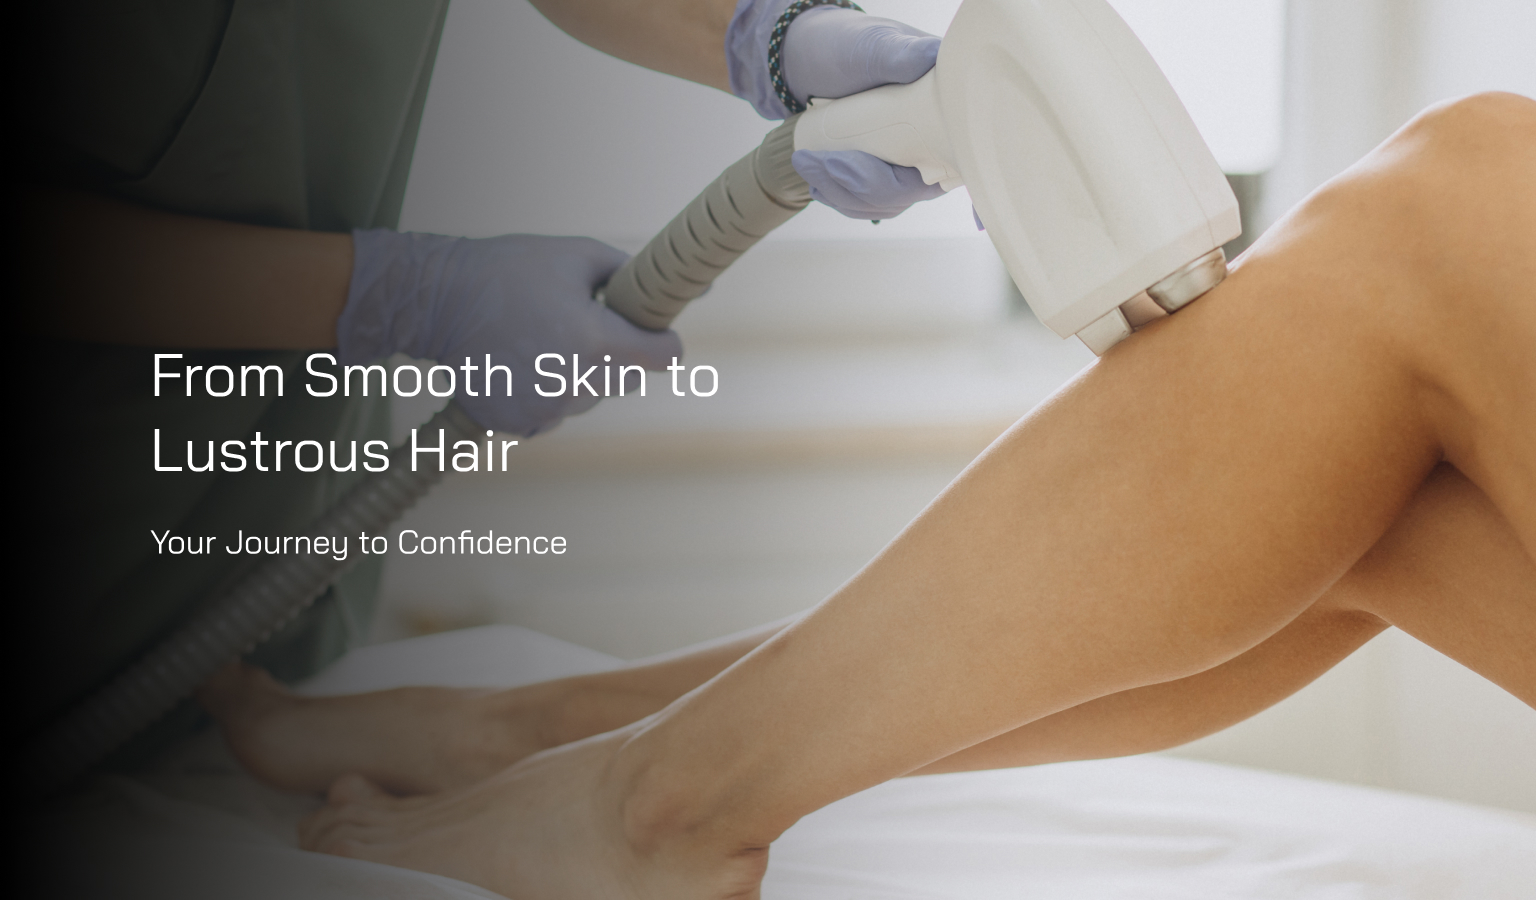 Smooth, hair-free skin achieved through advanced laser therapy at The Skin Firm.